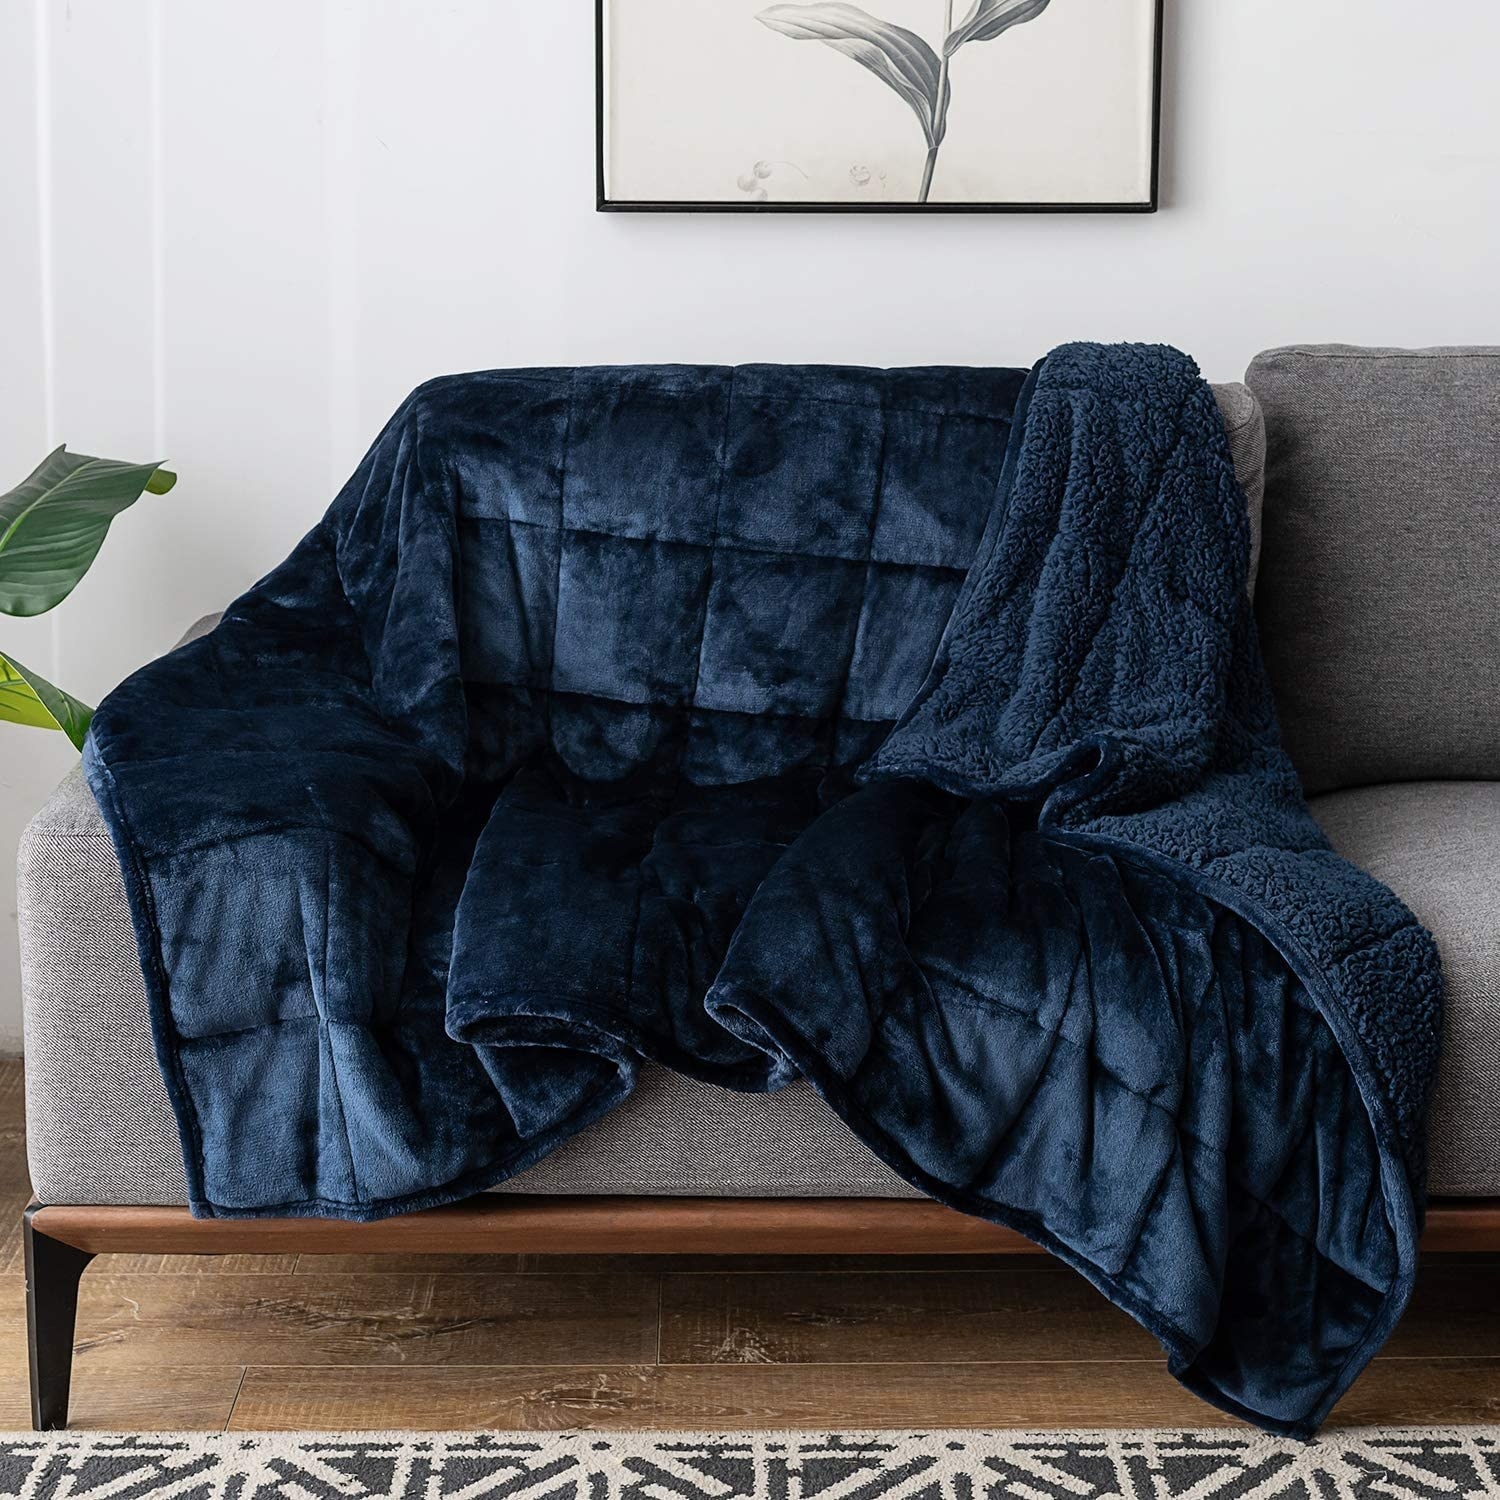 A weighted blanket draped over a couch